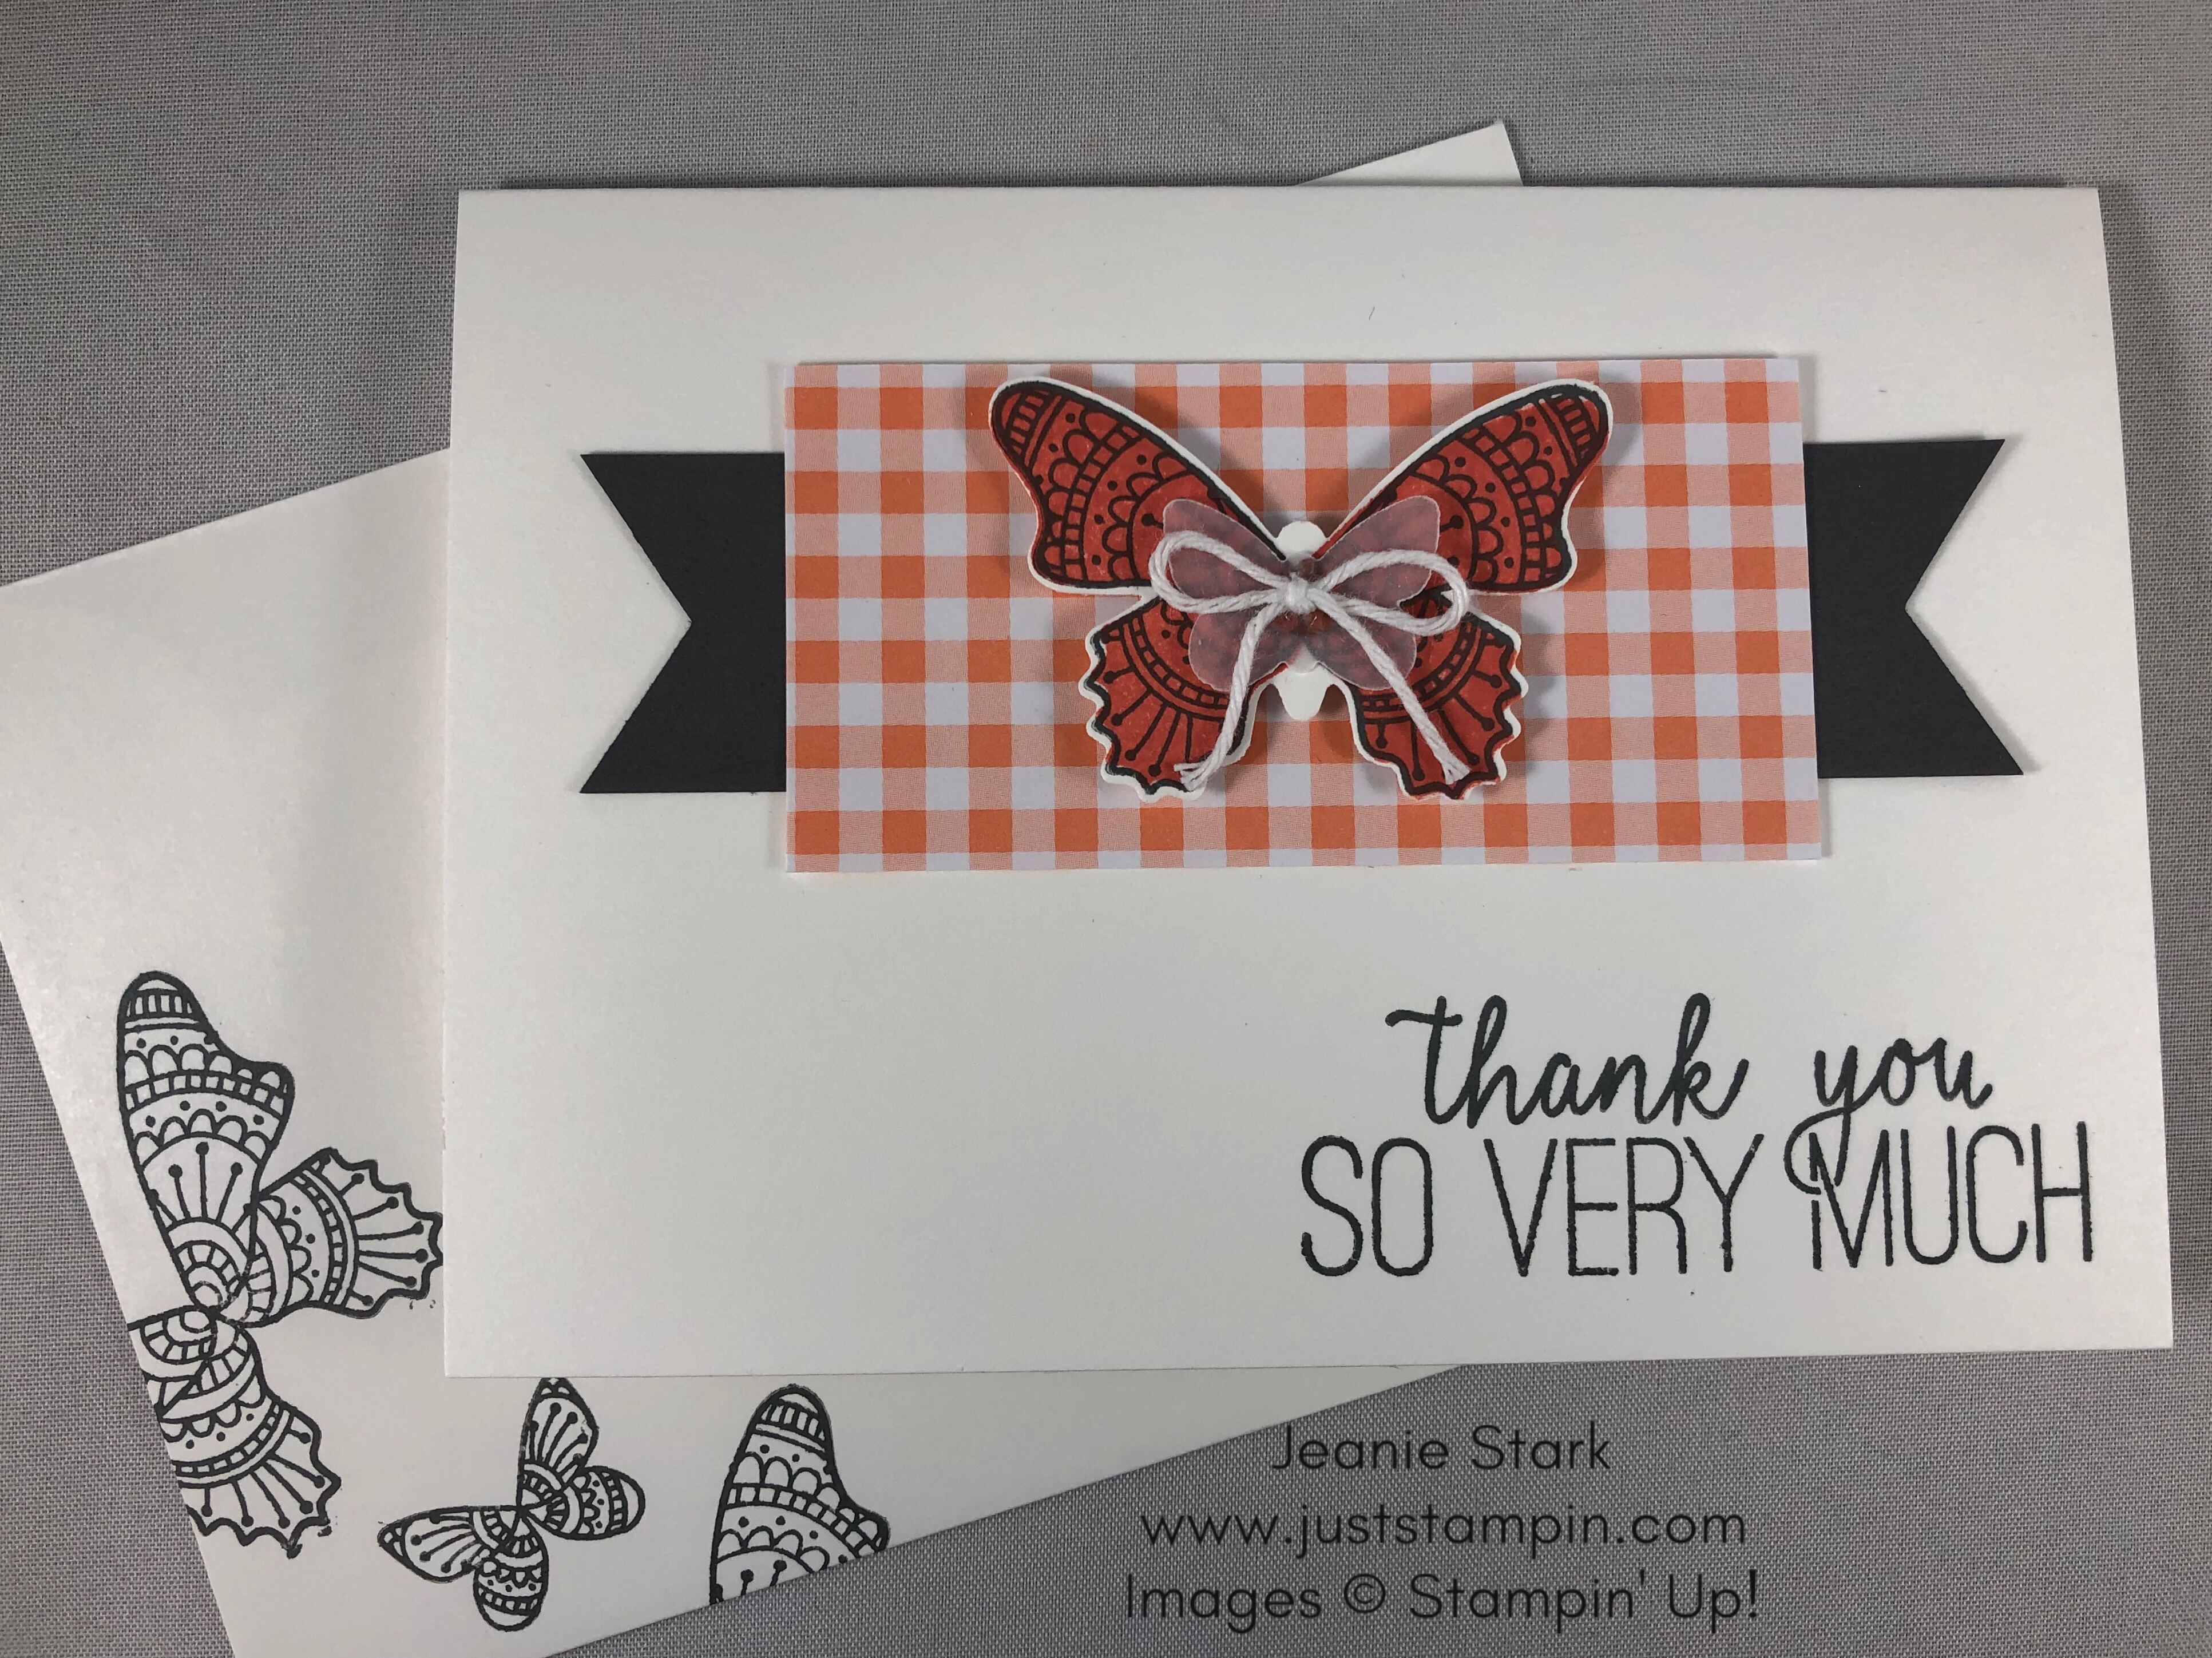 Stampin Up Butterfly Gala thank you note card idea - Jeanie Stark StampinUp